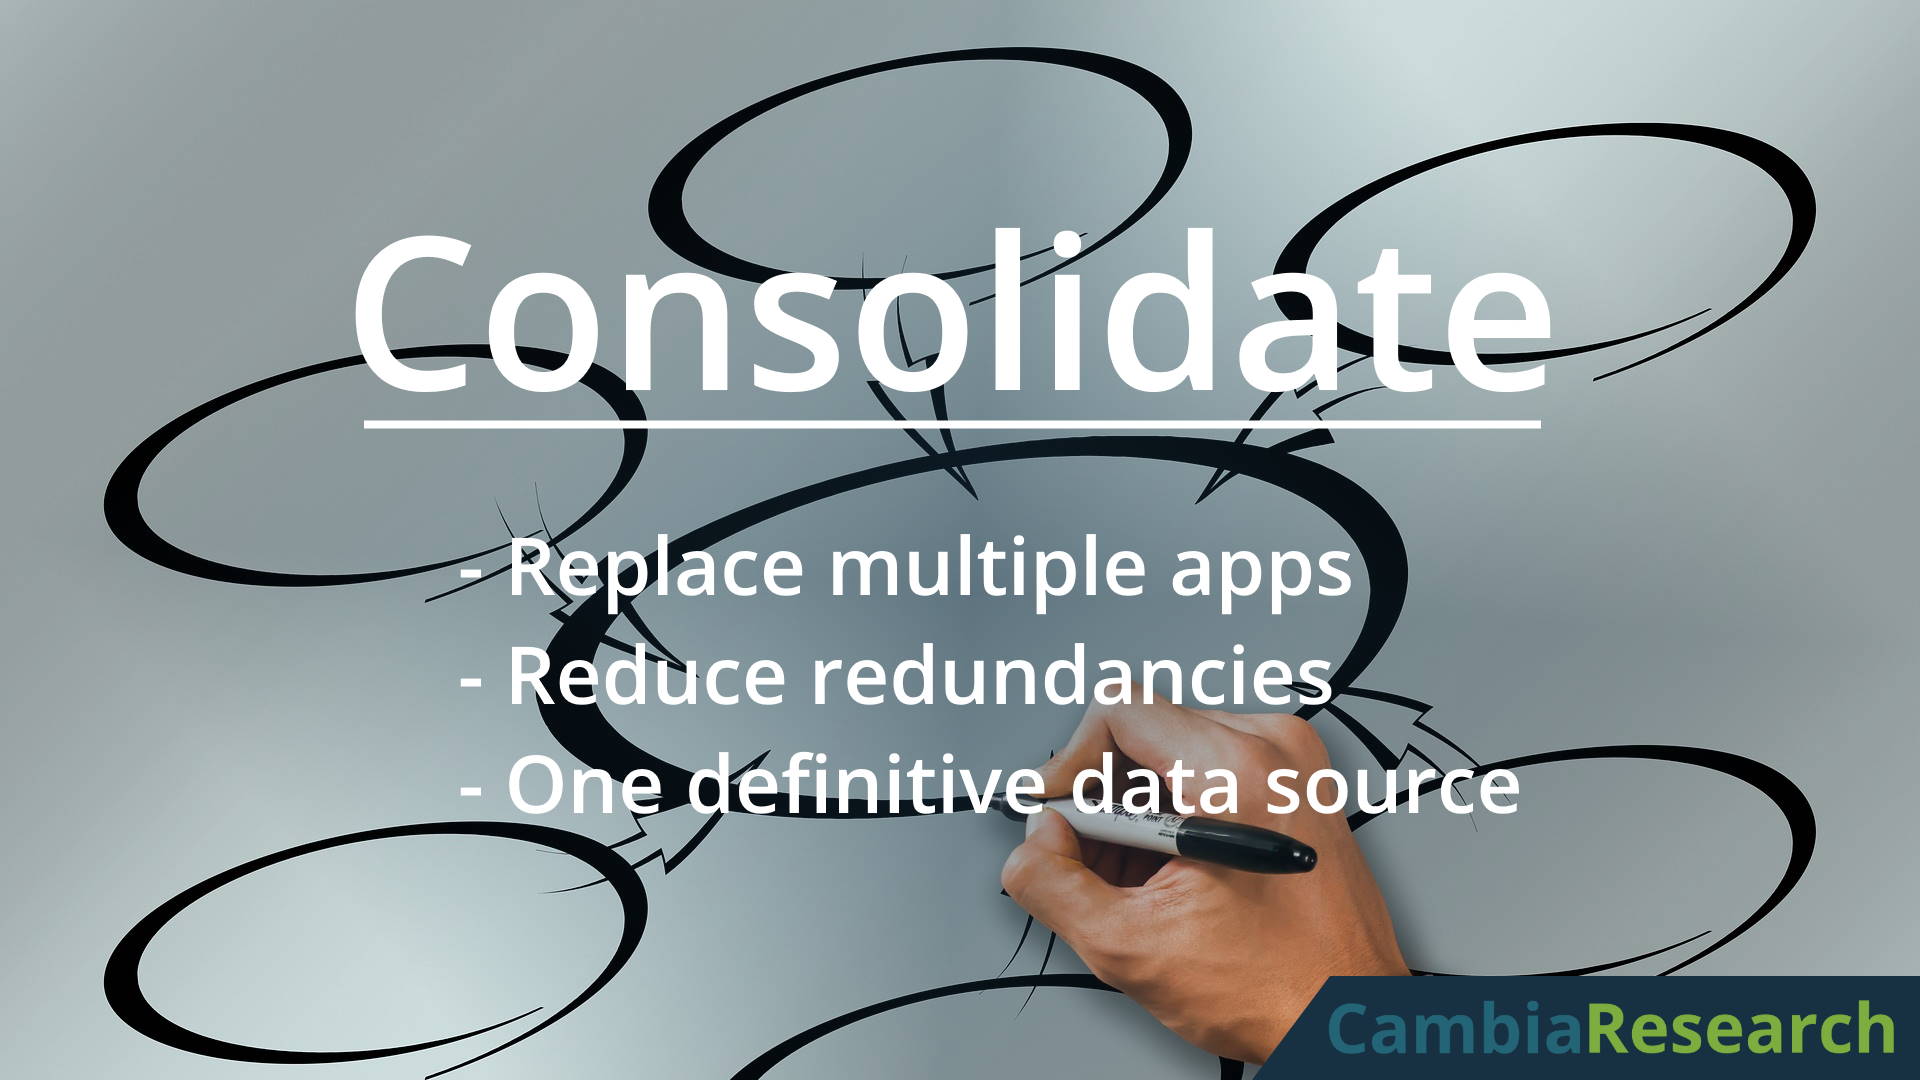 Consolidate existing systems and software with custom software solutions.